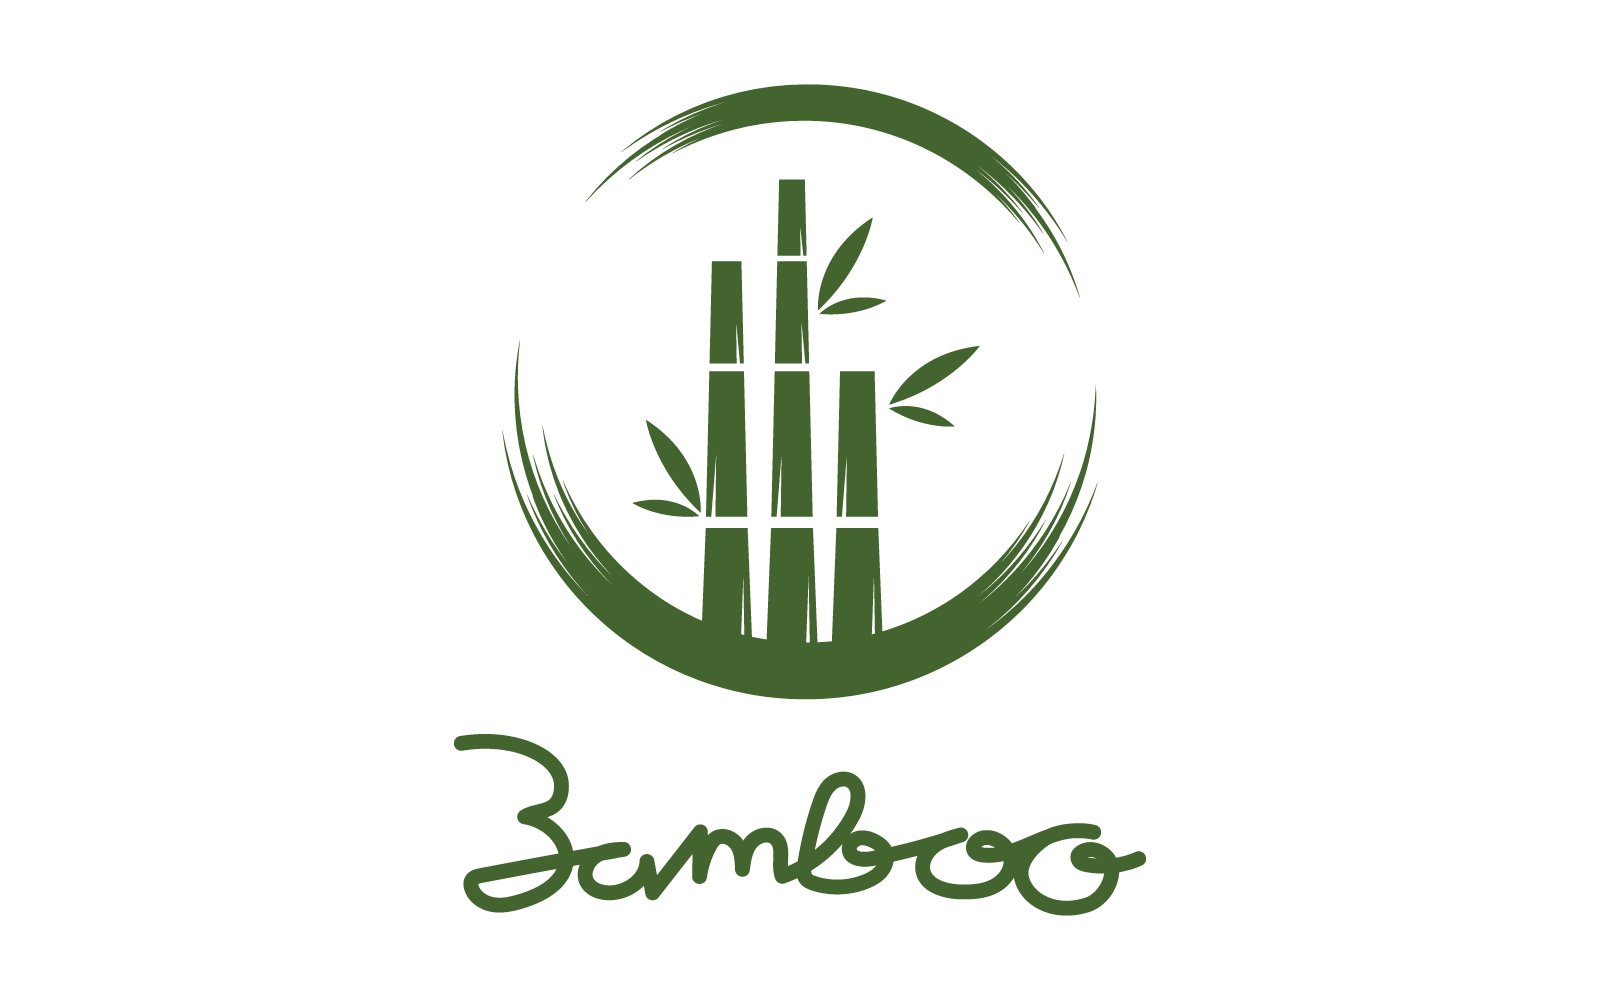 Bamboo with green leaf logo illustration vector flat design template